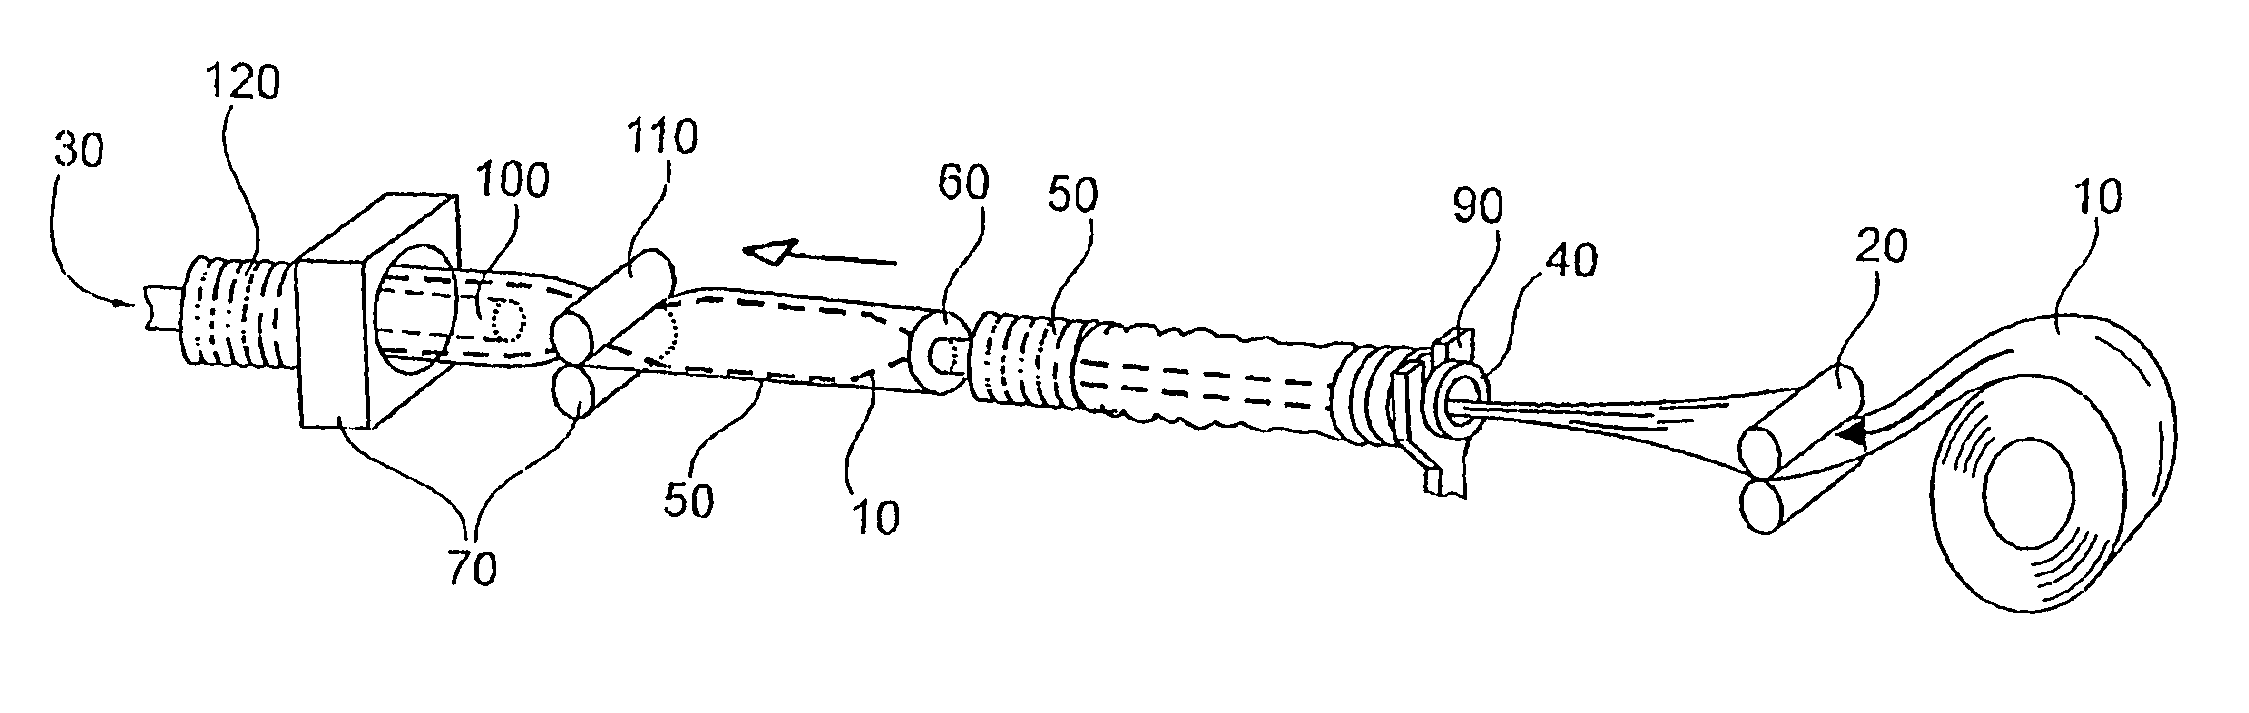 Process for producing a composite food casing